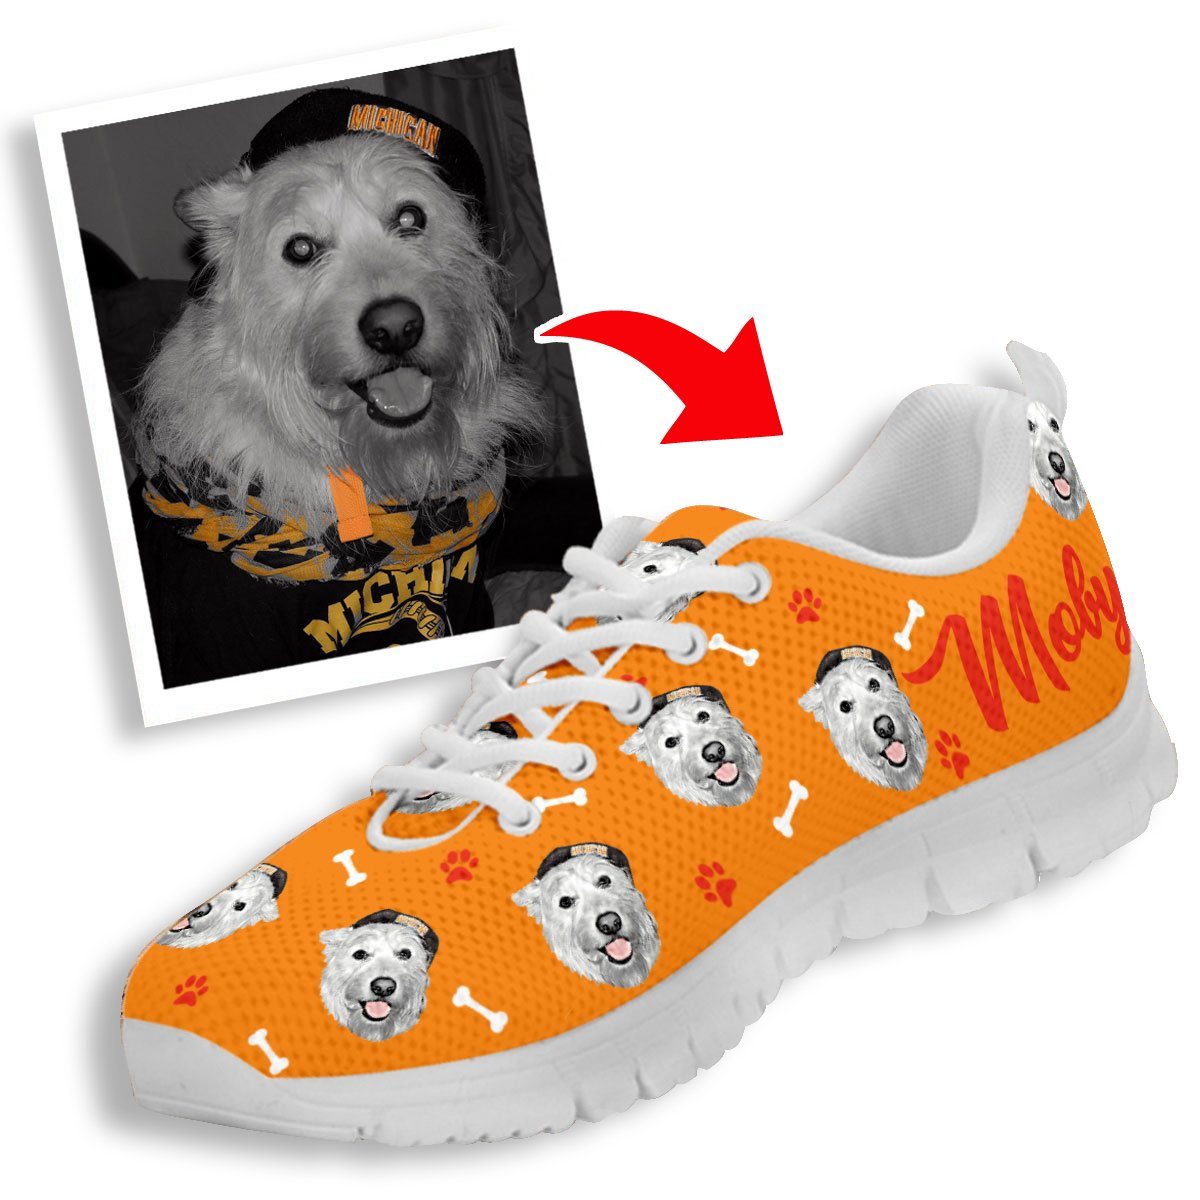 Real sneakers for dogs | Dog booties, Dog shoes, Dog boots